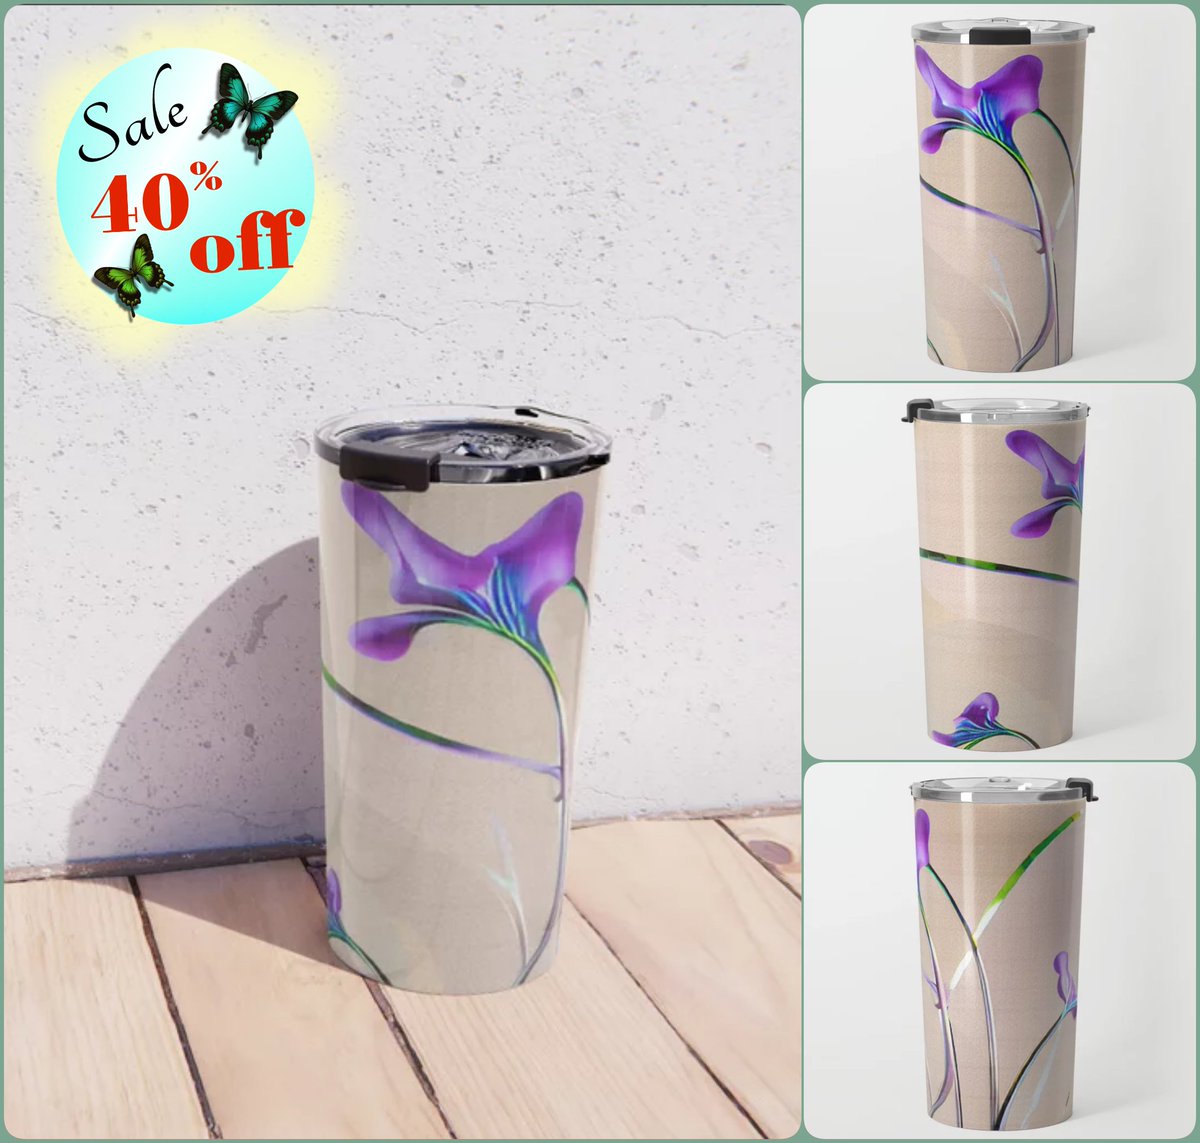 *SALE 40% Off* Polite Playfulness Travel Mug~by Art_Falaxy~ ~Table Art Exquisite!~ #coasters #gifts #trays #mugs #coffee #society6 #travel #artfalaxy #art #accents #modern #trendy #wine #water #interior #placemats #tablecloths #runners society6.com/product/polite… COLLECTION: